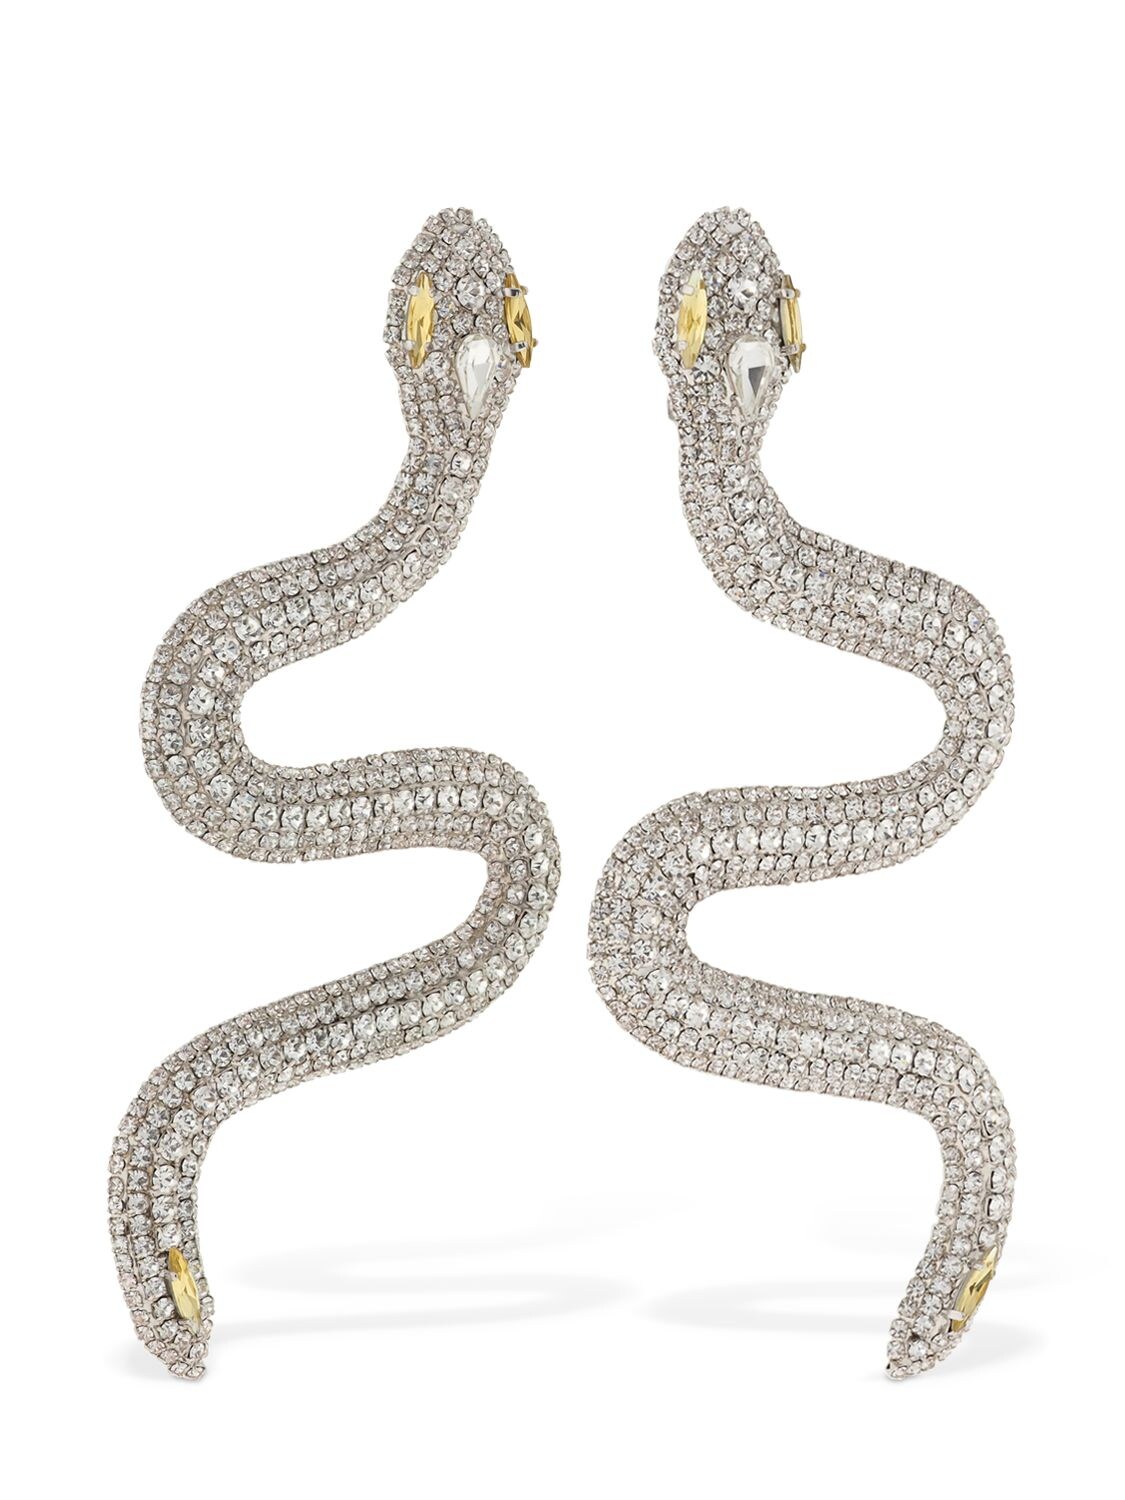 ALESSANDRA RICH CRYSTAL SNAKE CLIP-ON PENDANT EARRINGS,71IWYS016-MDAXIENSWVNUQUW1